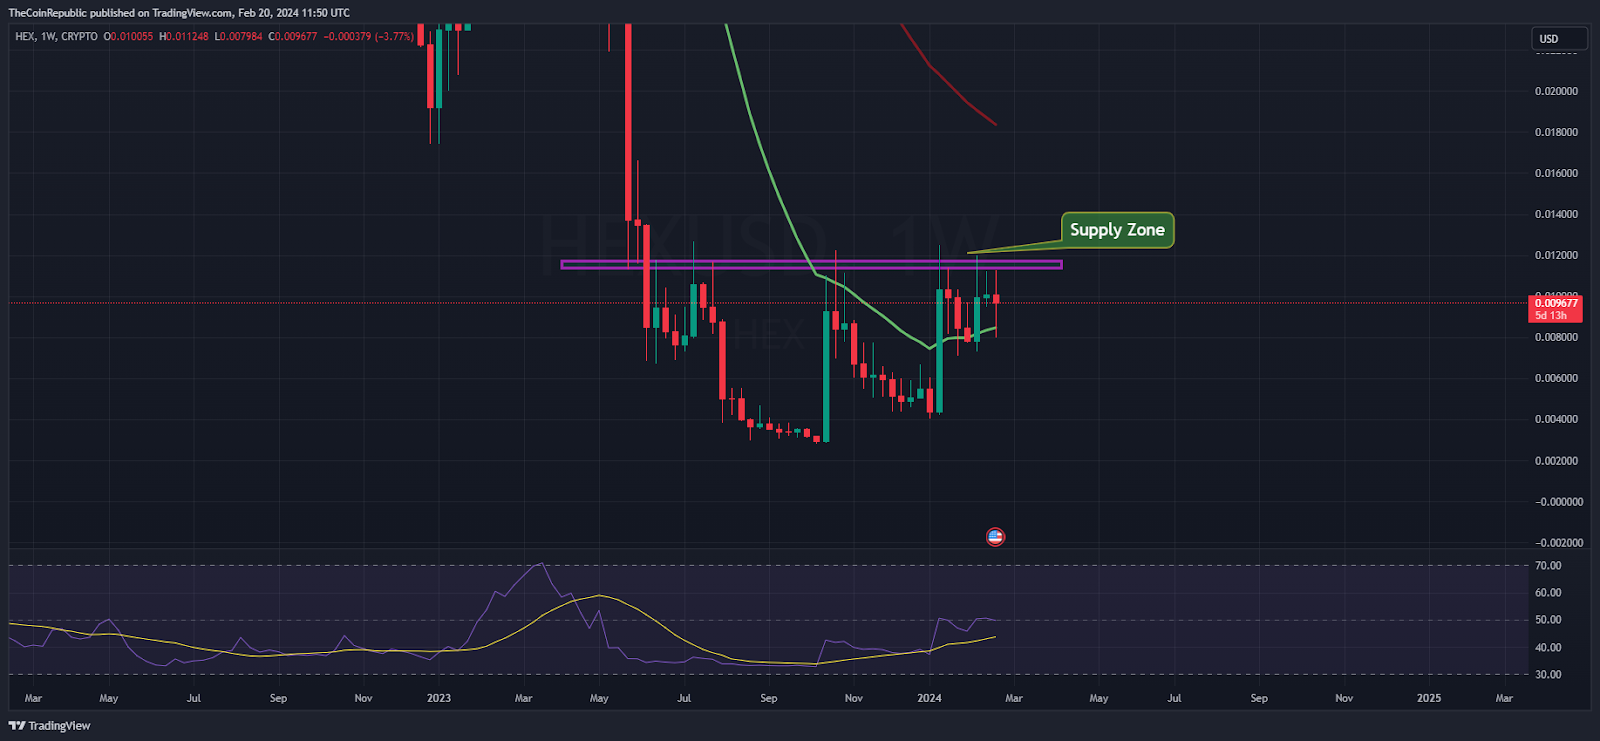 HEX Price Prediction: Is HEX Ready For a Selloff Below $0.009000?